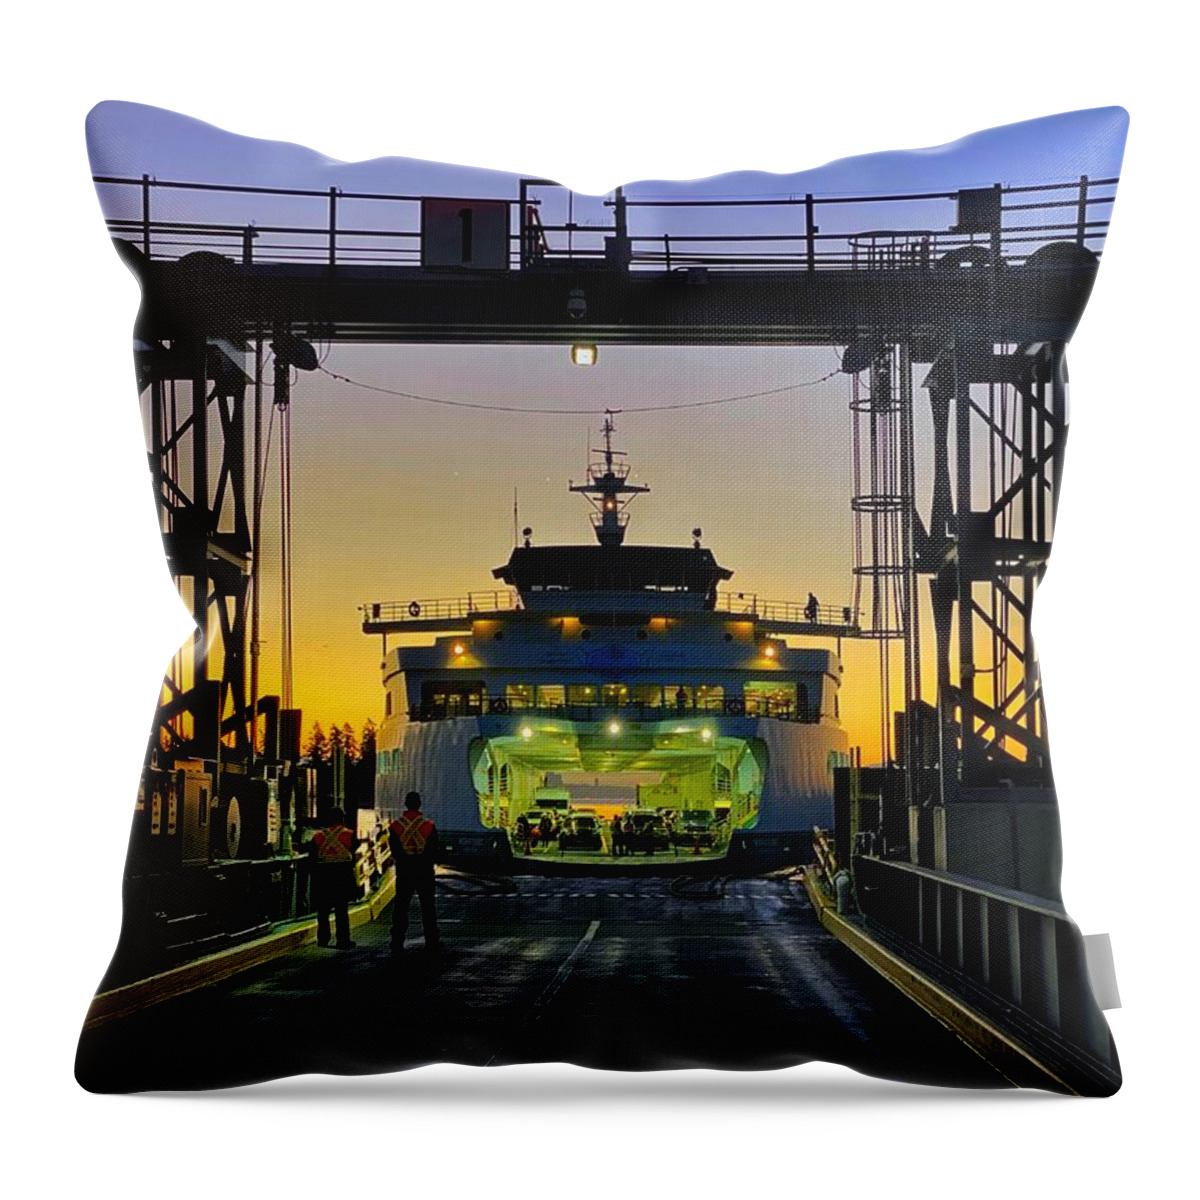 Wsdot Throw Pillow featuring the photograph Washington State Ferry - 2 by Jerry Abbott